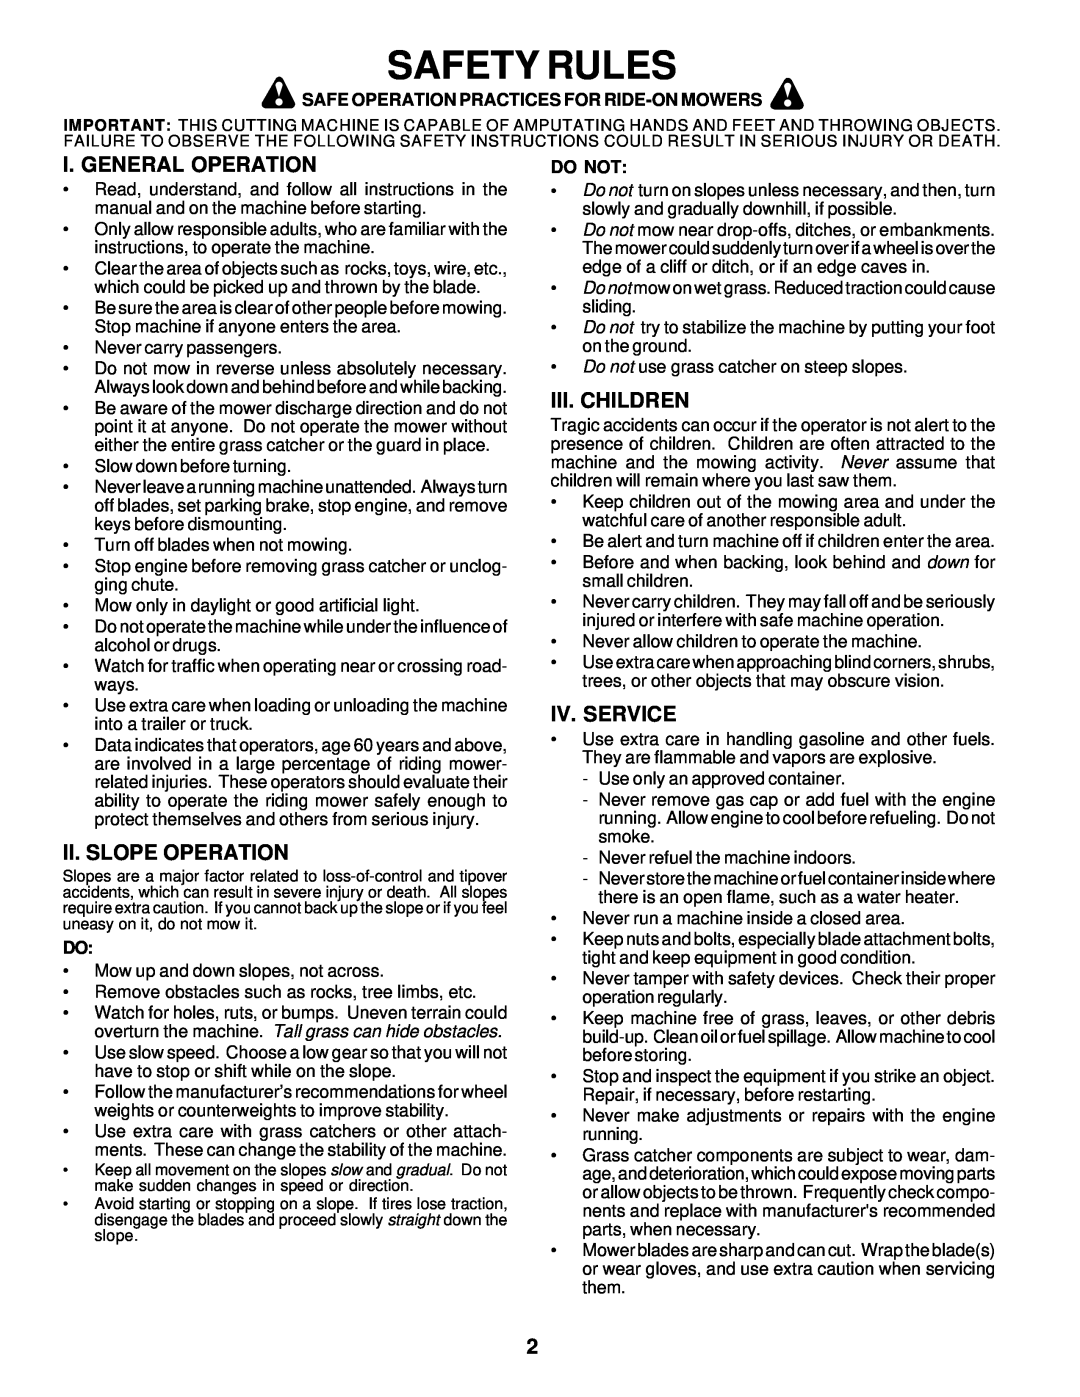 Weed Eater WE16542D owner manual Safety Rules, I. General Operation, Ii. Slope Operation, Iii. Children, Iv. Service 